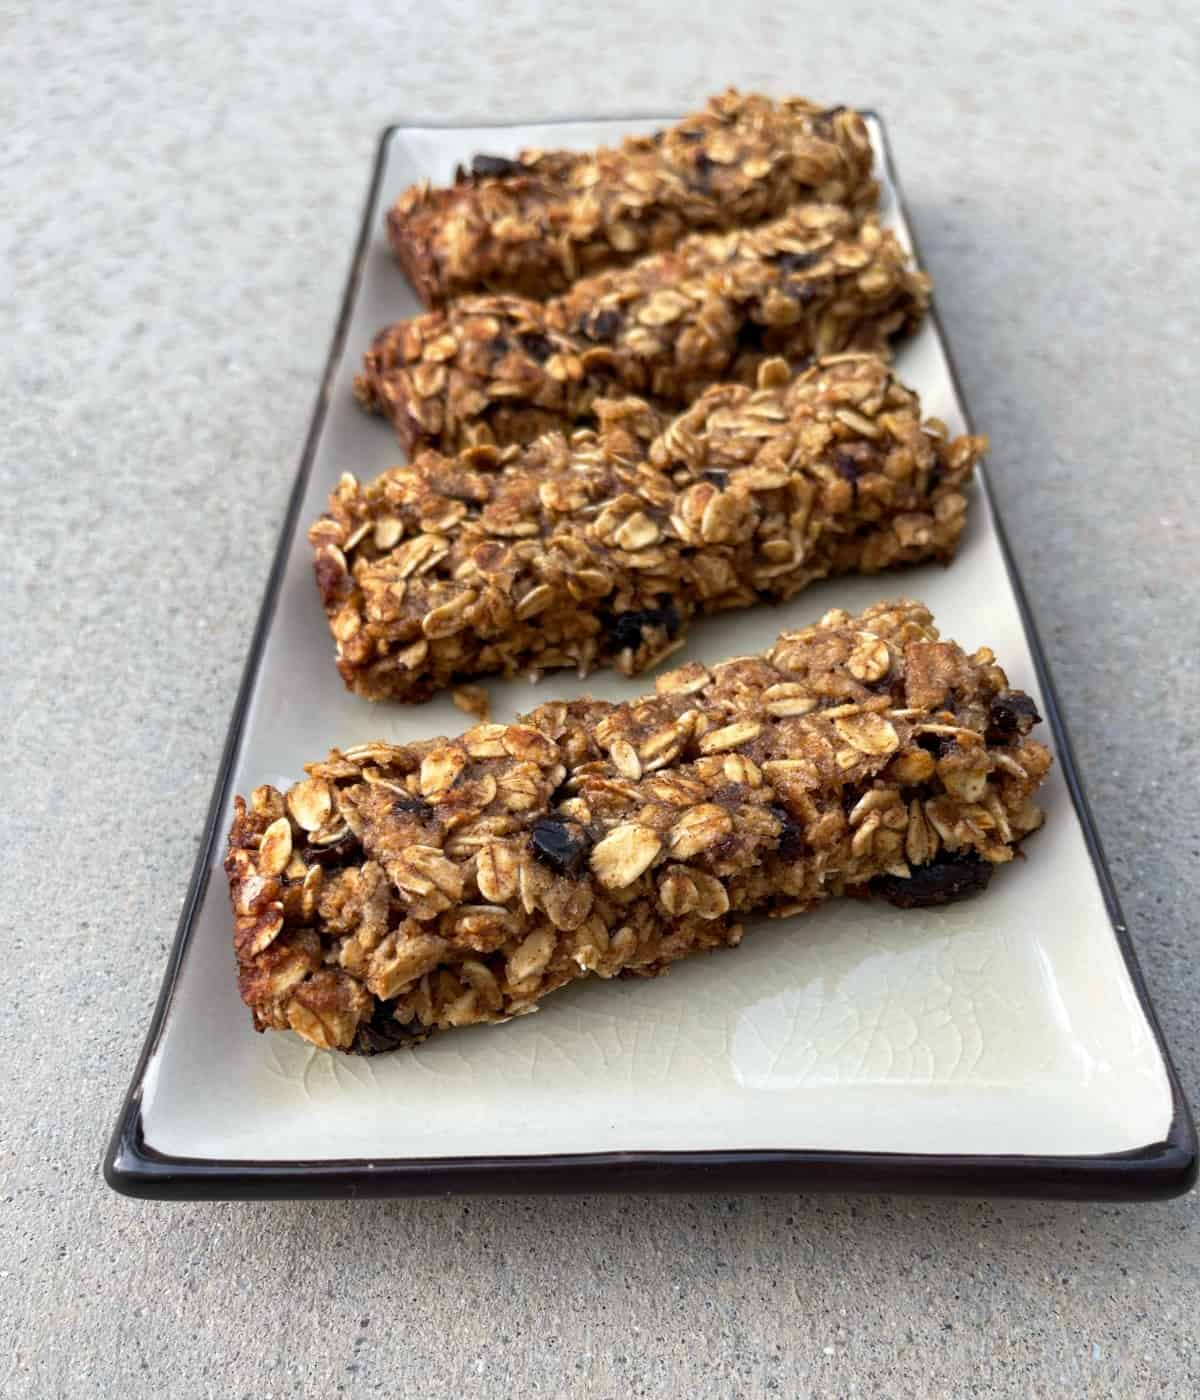 Four gluten-free oatmeal spice bars on small serving plate.